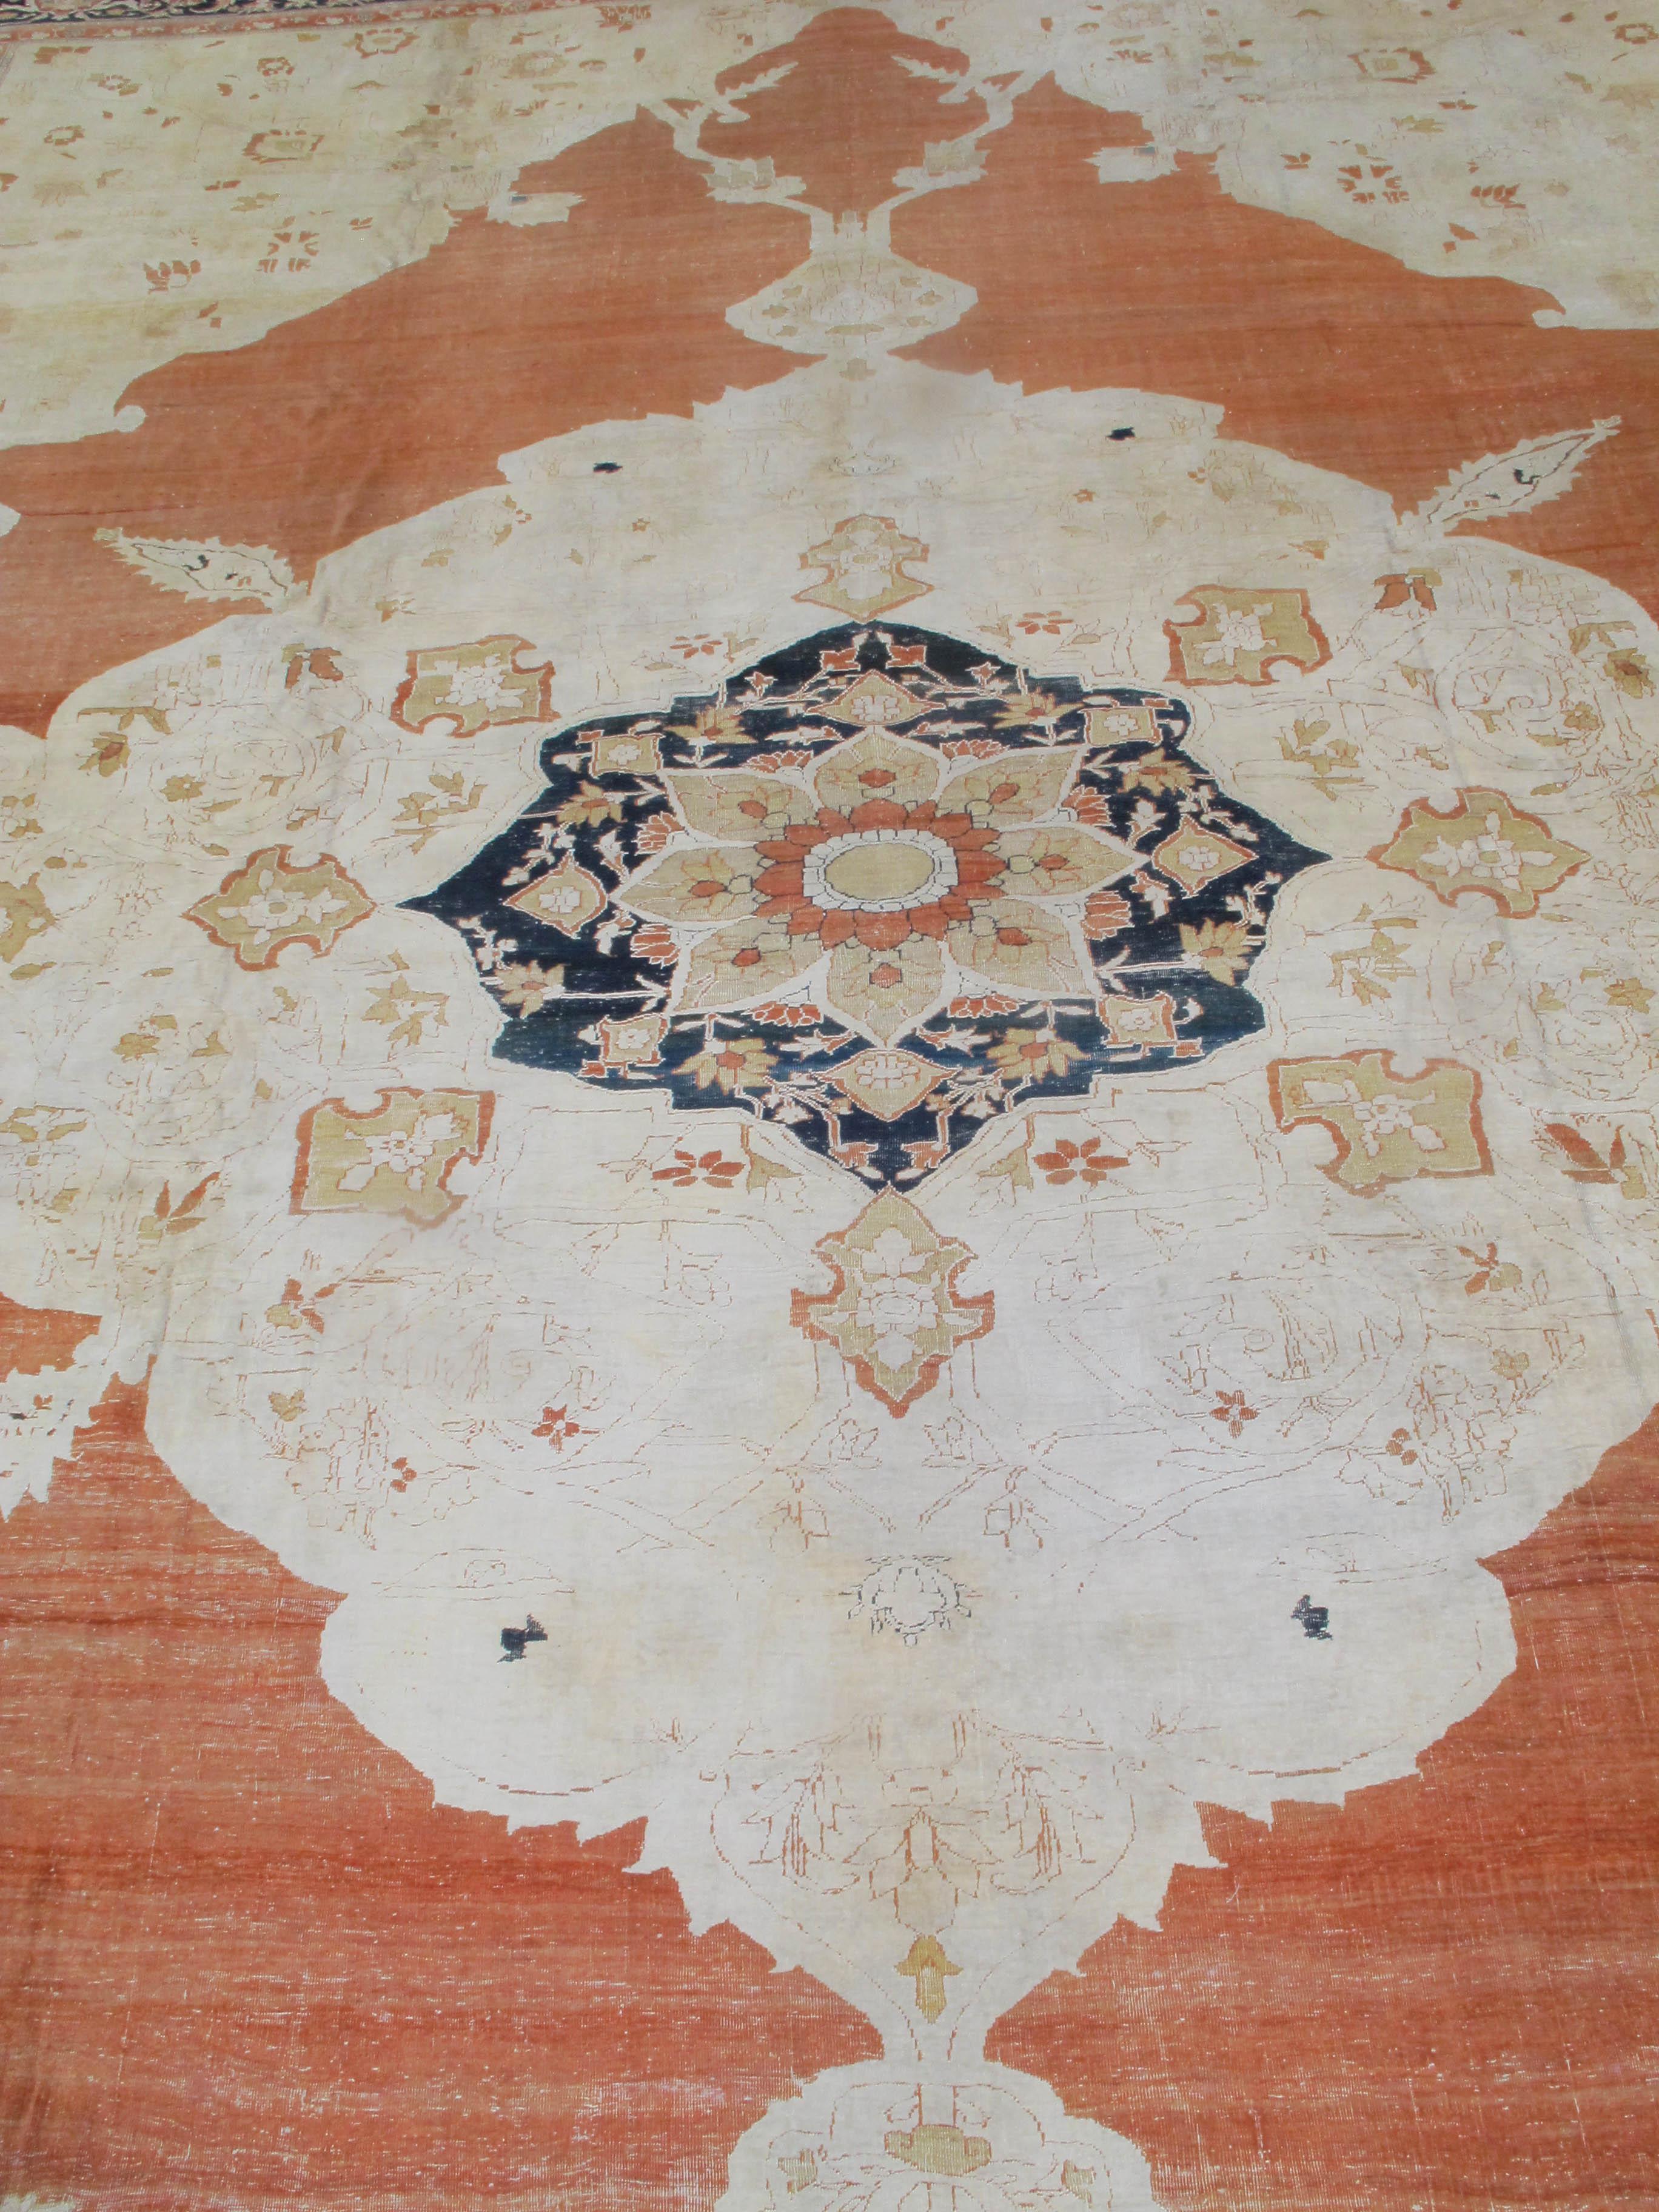 Antique Persian Tabriz Rug, Mid-19th Century

Additional Information:
Dimensions: 14'8